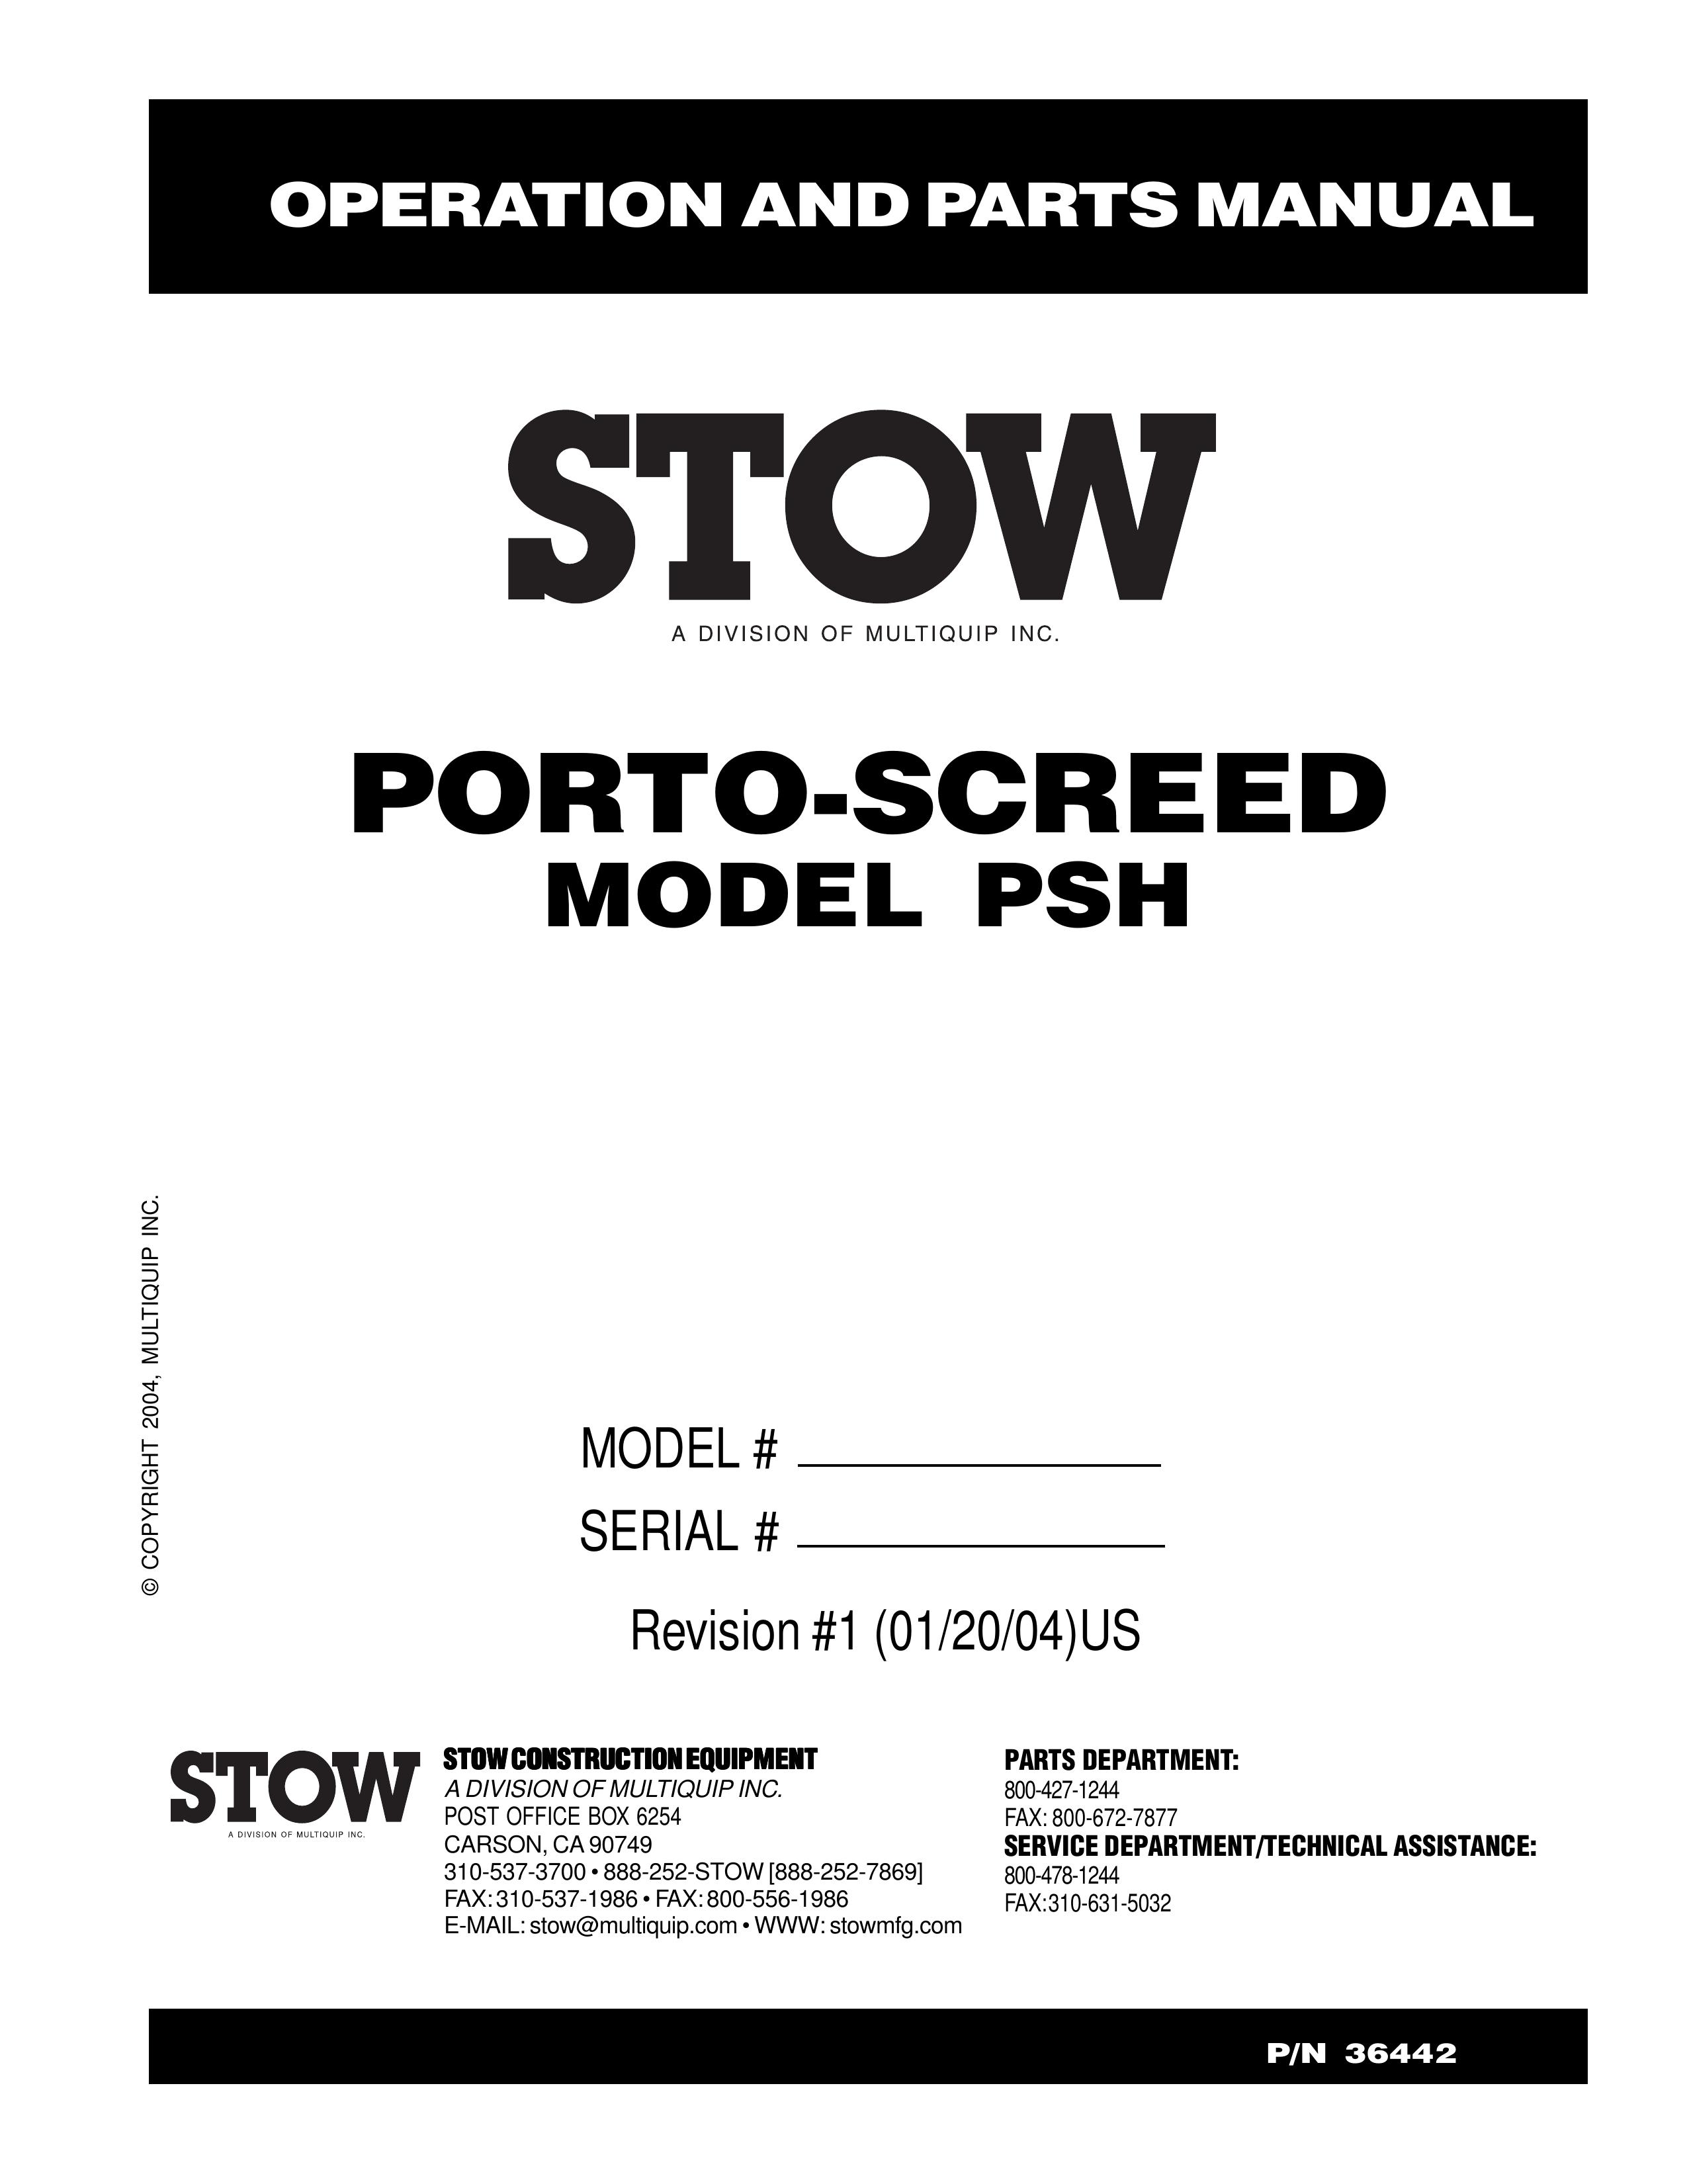 Stow PSH Microscope & Magnifier User Manual